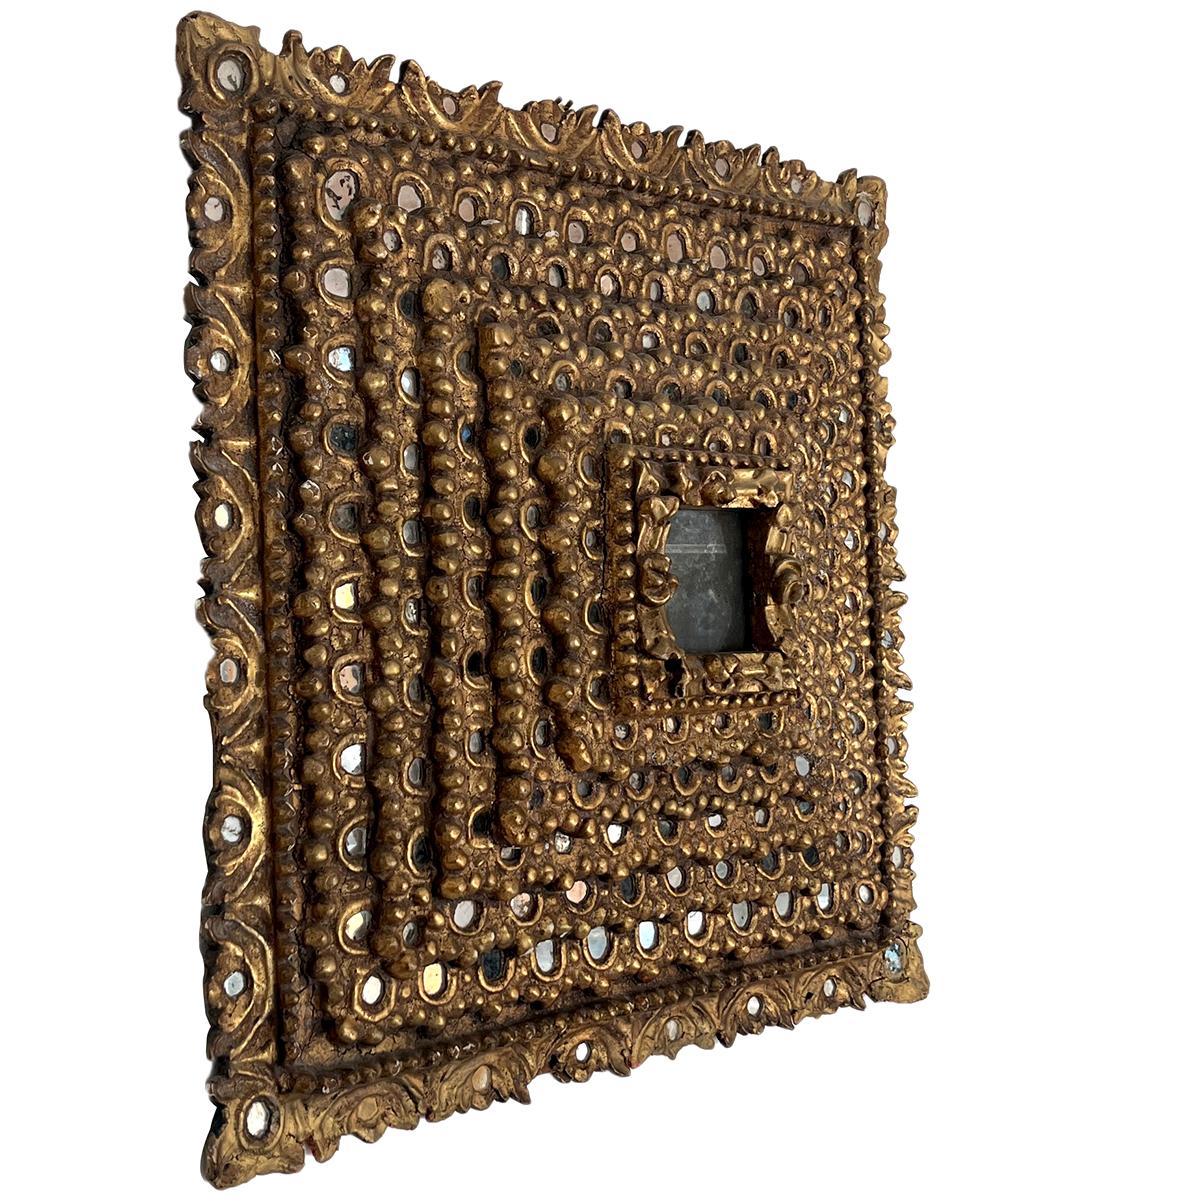 A 19th Century Spanish gilt wood 7-layer mirror with mirror insets in frame and foliage motif along edges.

Measurements:
25